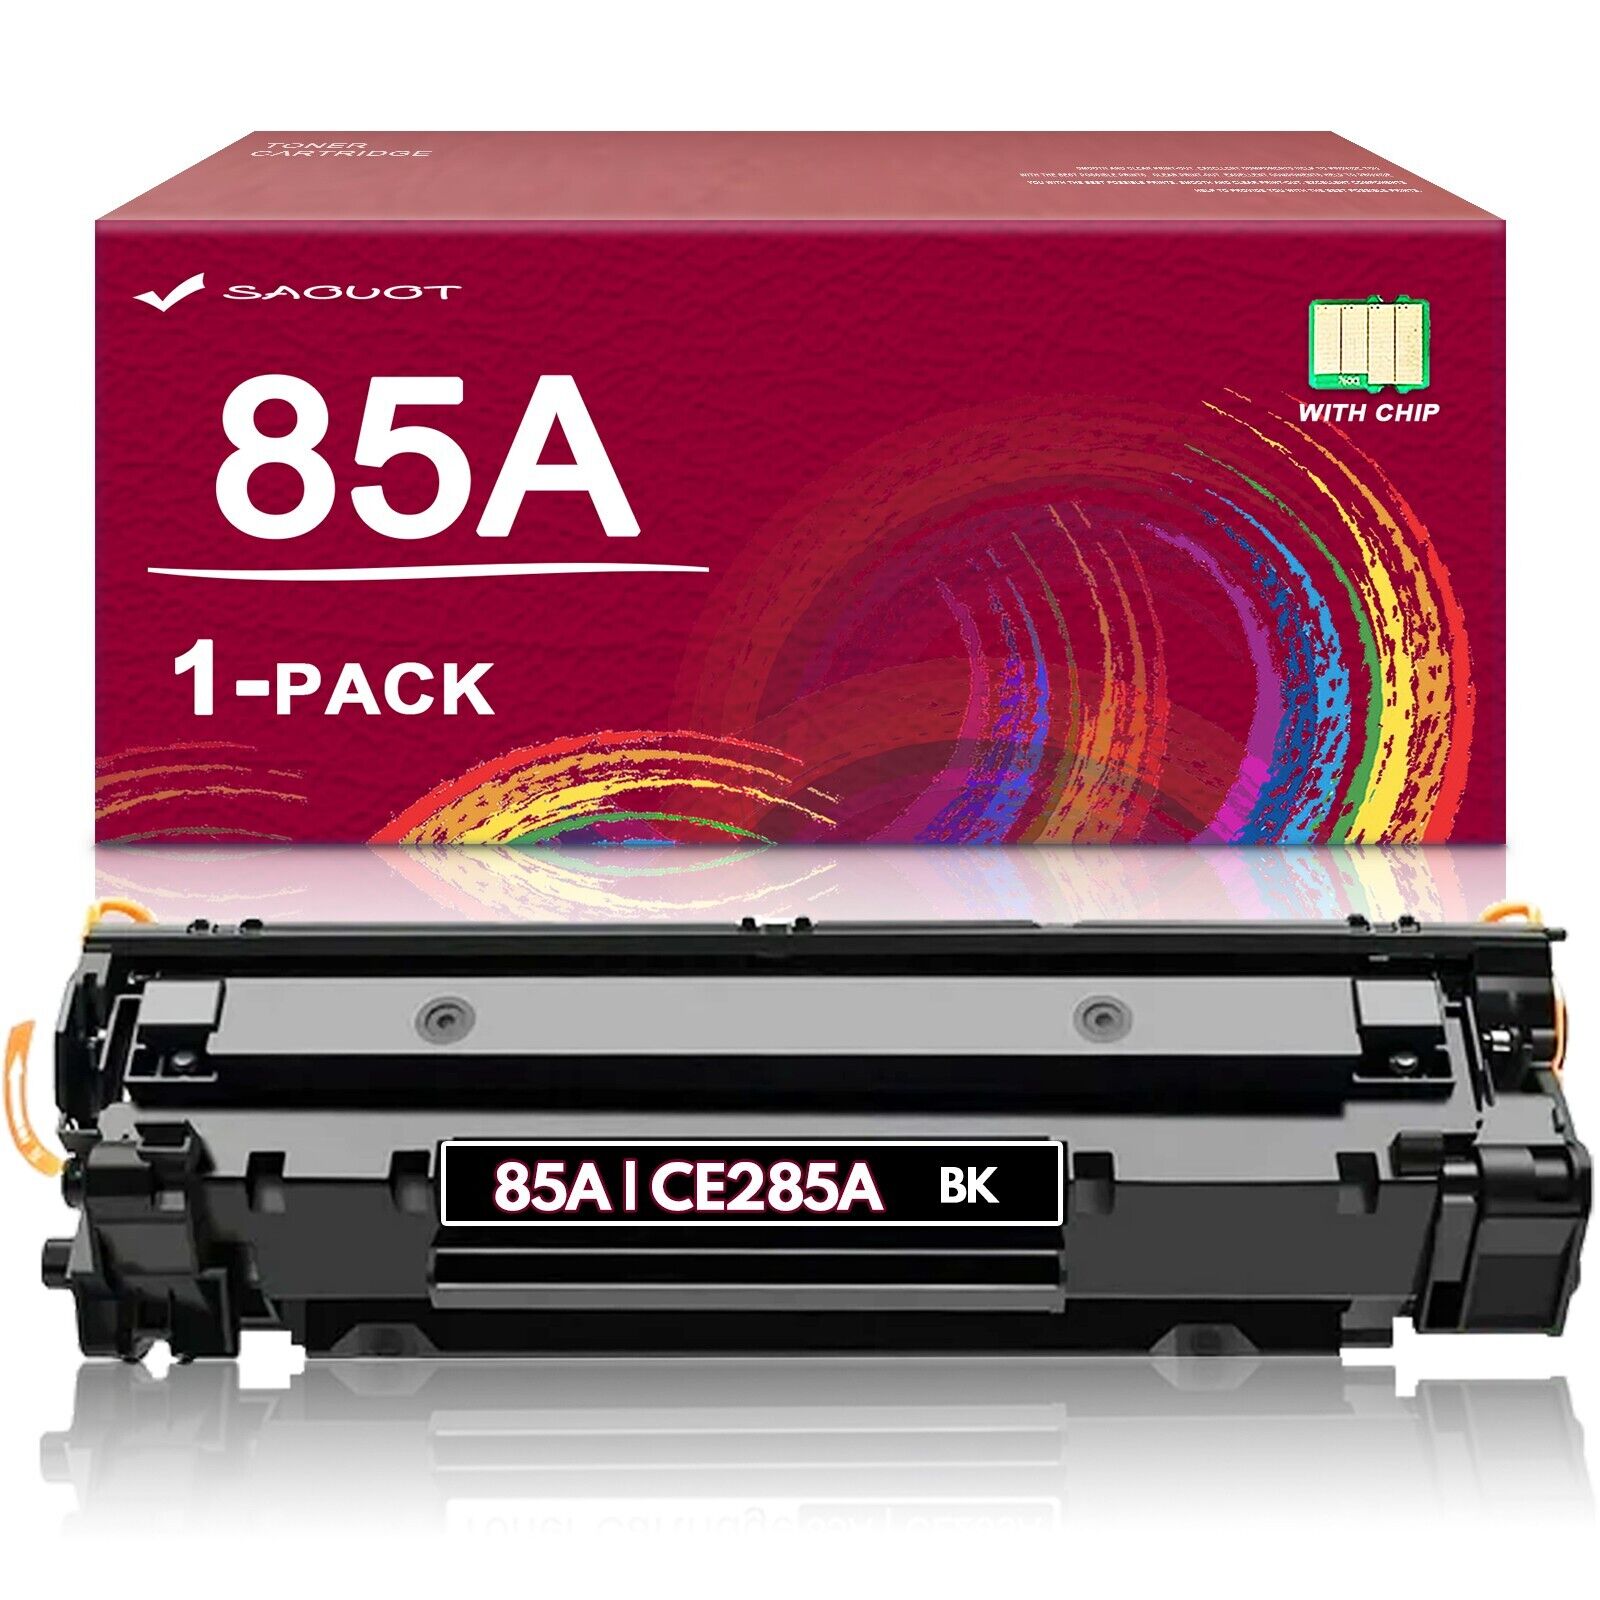 85A | CE285A Toner Cartridge Black Replacement for HP 85A Pro P1102W Printer